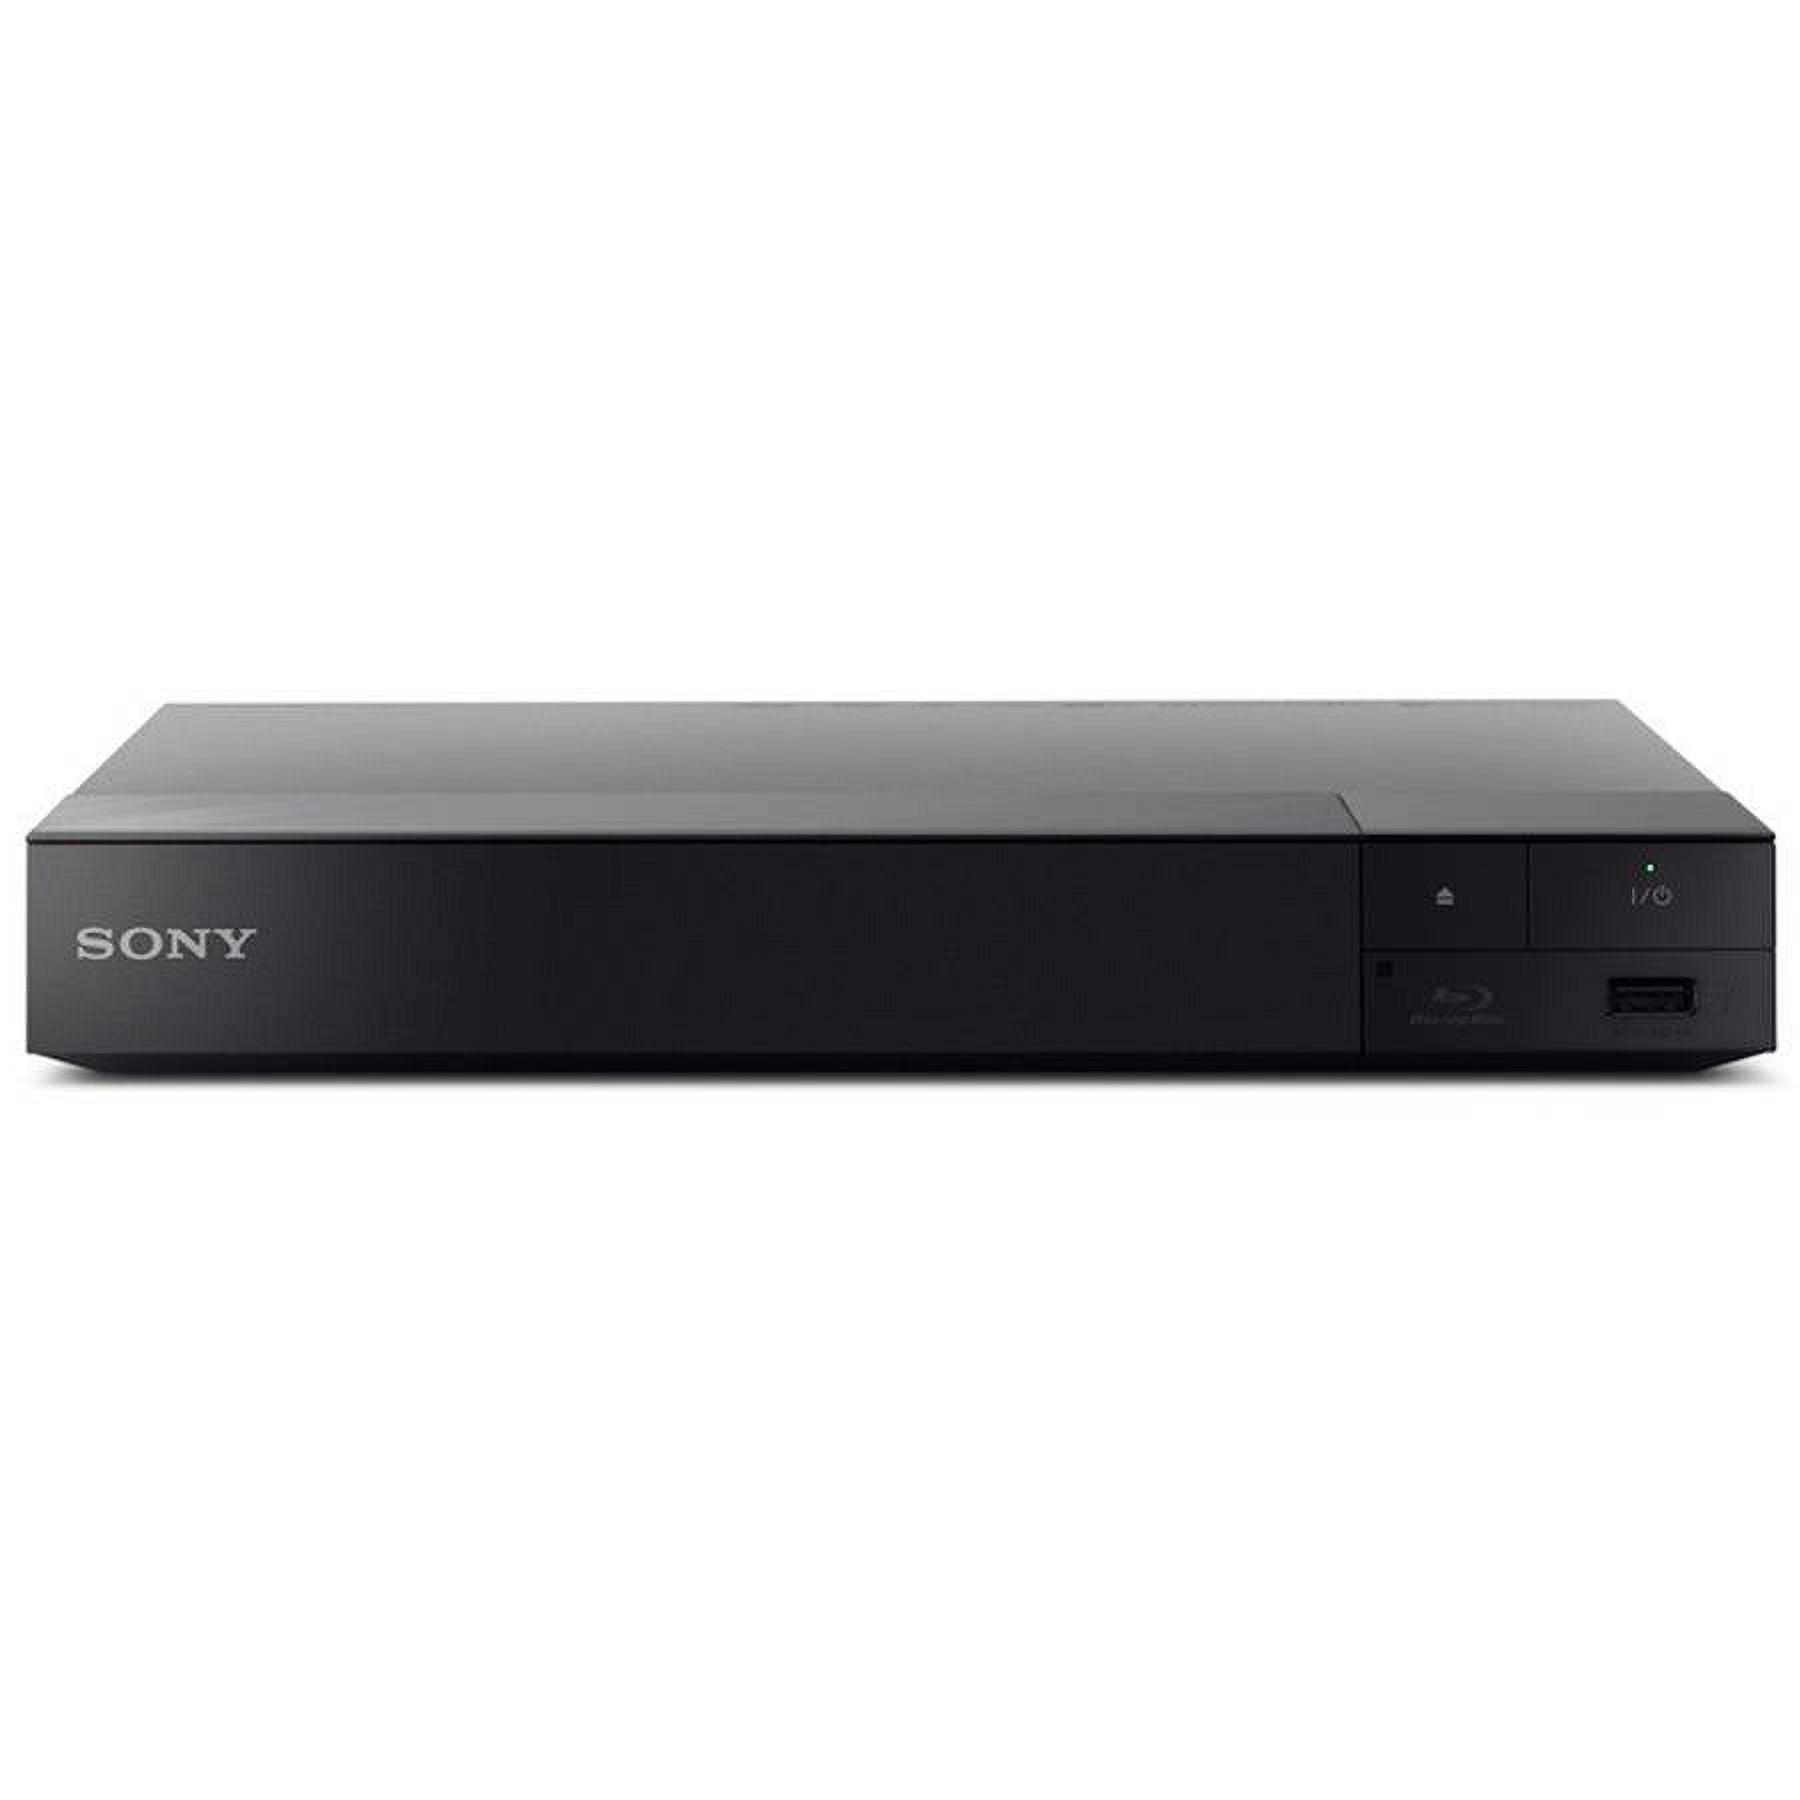 Sony 4K WiFi Blu-ray Disc Player (BDPS6500) - image 1 of 2